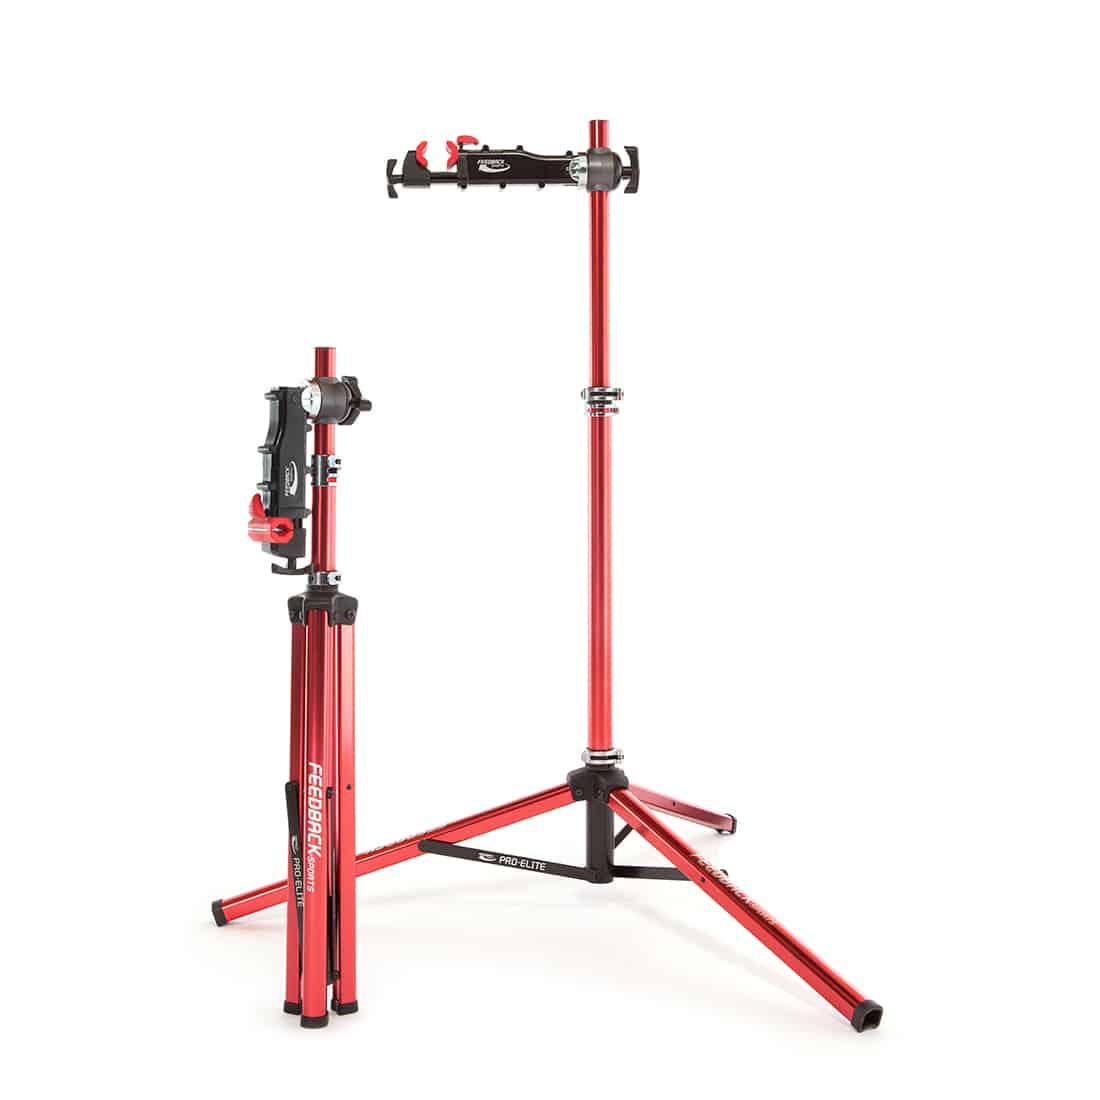 Feedback Sports bike repair stand folded up and deployed for use.